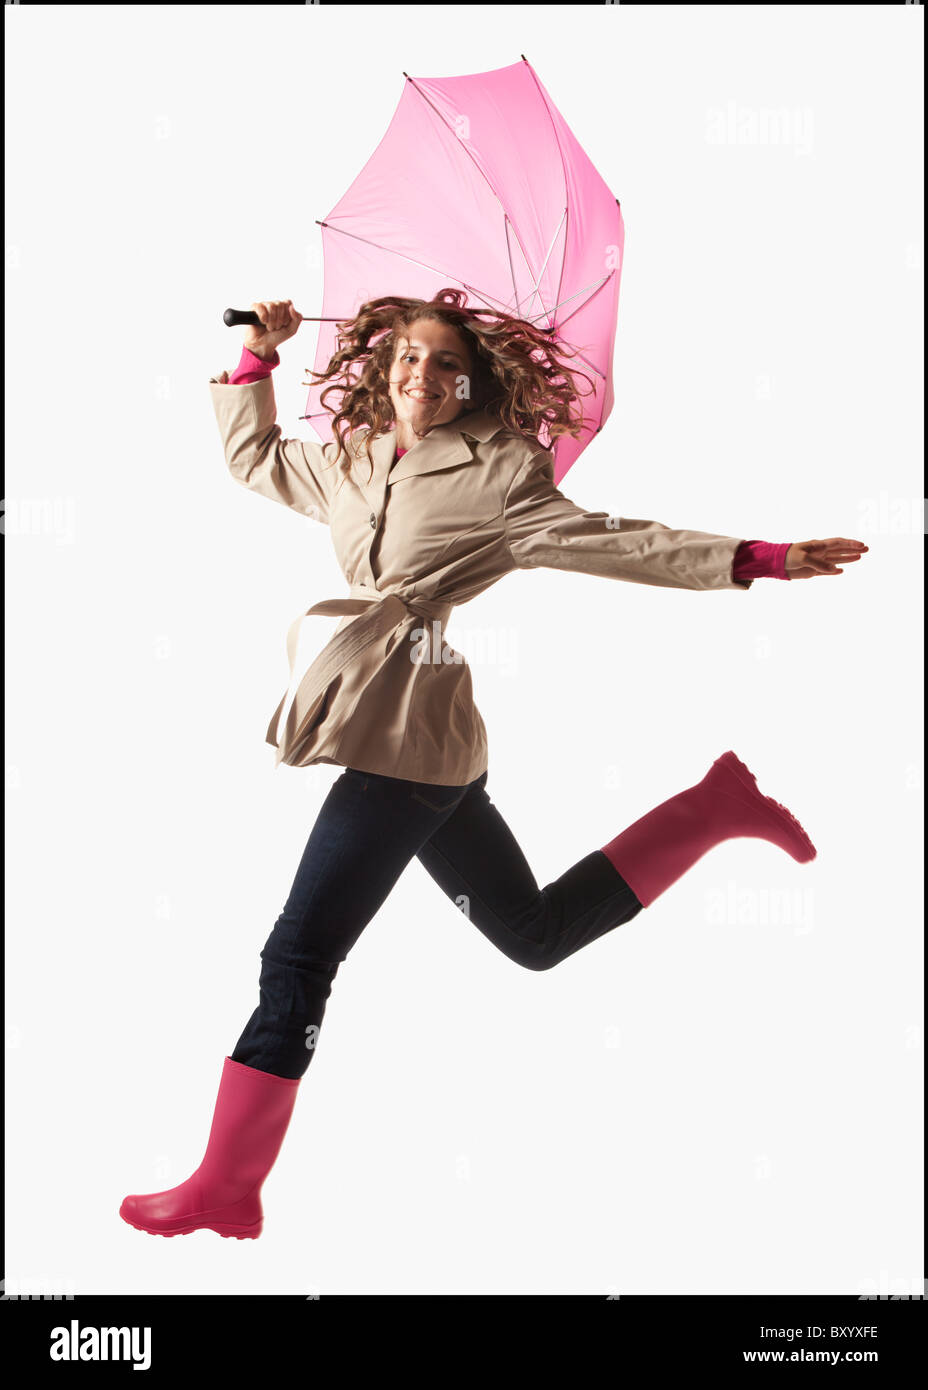 Woman with umbrella jumping on white background Stock Photo